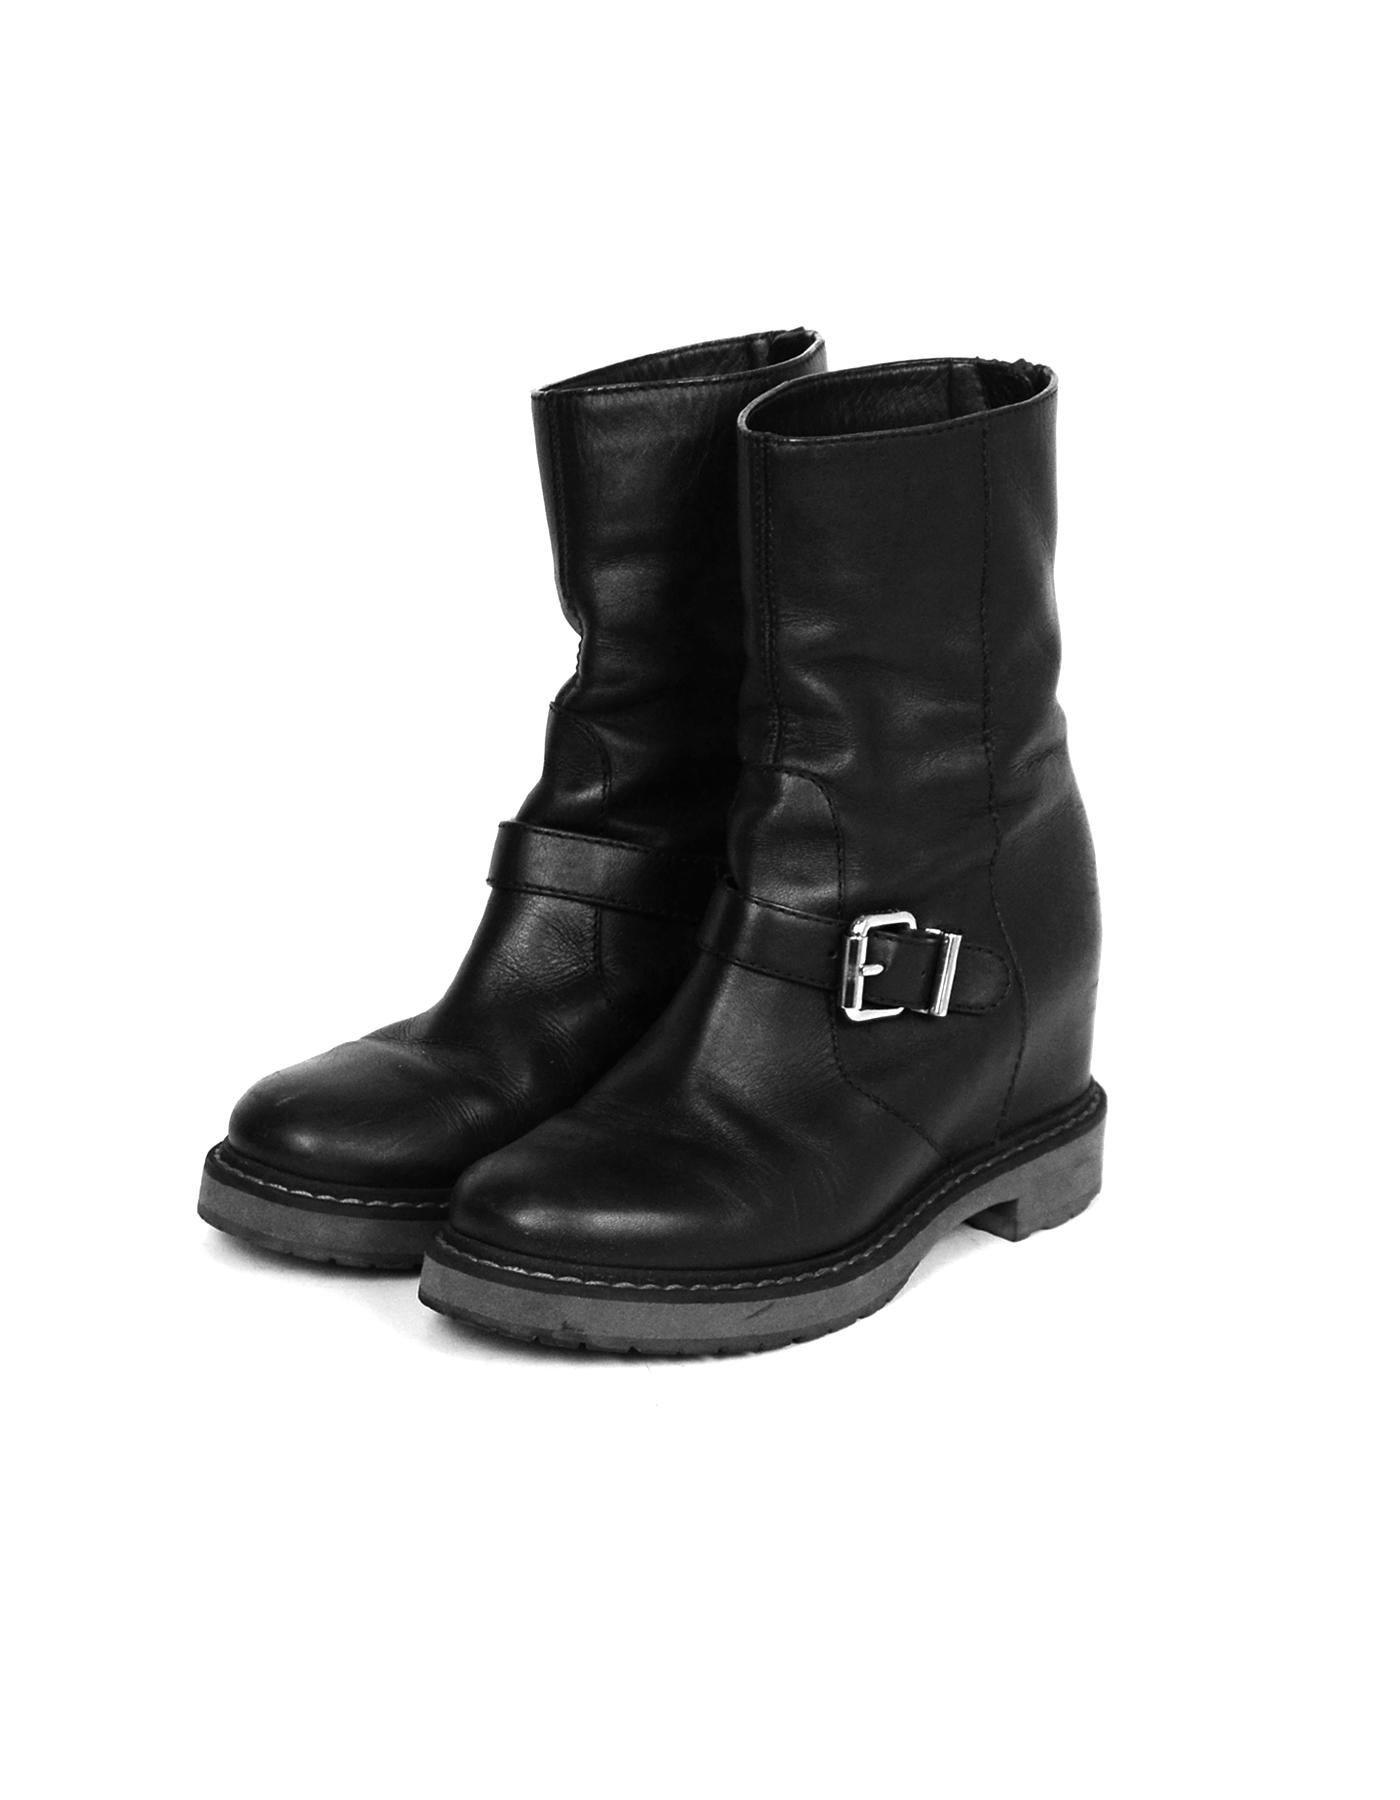 Fendi Black Leather Concealed Wedge Boot sz 38.5

Made In: Italy 
Color: Black
Hardware: Silvertone
Materials: Leather
Closure/Opening: Back zipper
Overall Condition: Very good pre-owned condition, scuffs on the exterior (see photos), wear on soles